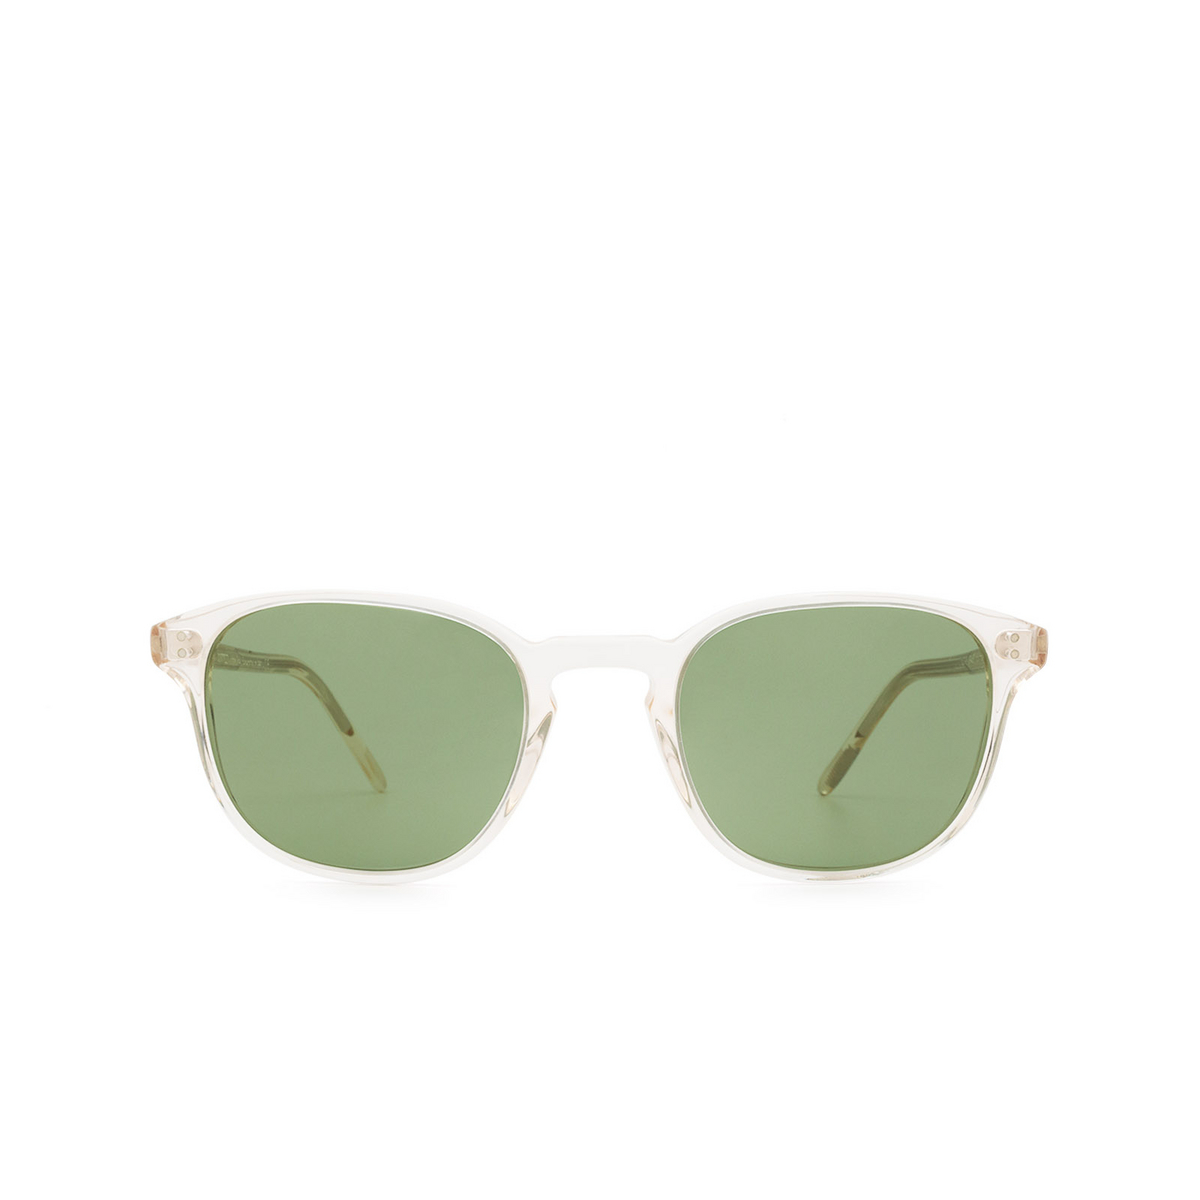 Oliver Peoples FAIRMONT Sunglasses 109452 Buff - front view